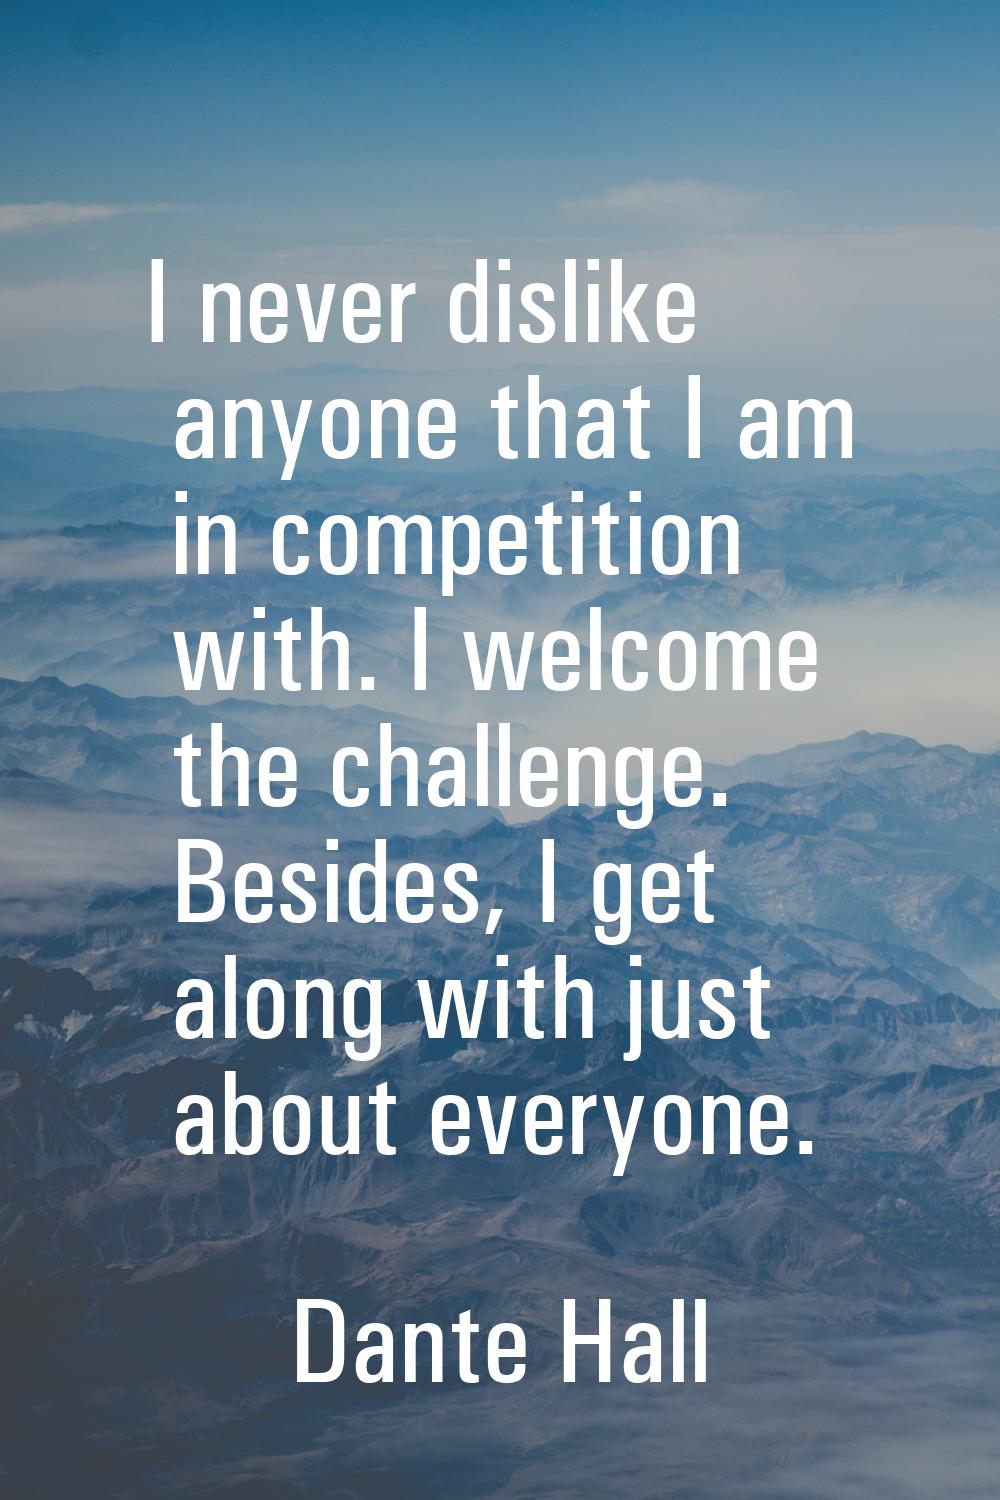 I never dislike anyone that I am in competition with. I welcome the challenge. Besides, I get along